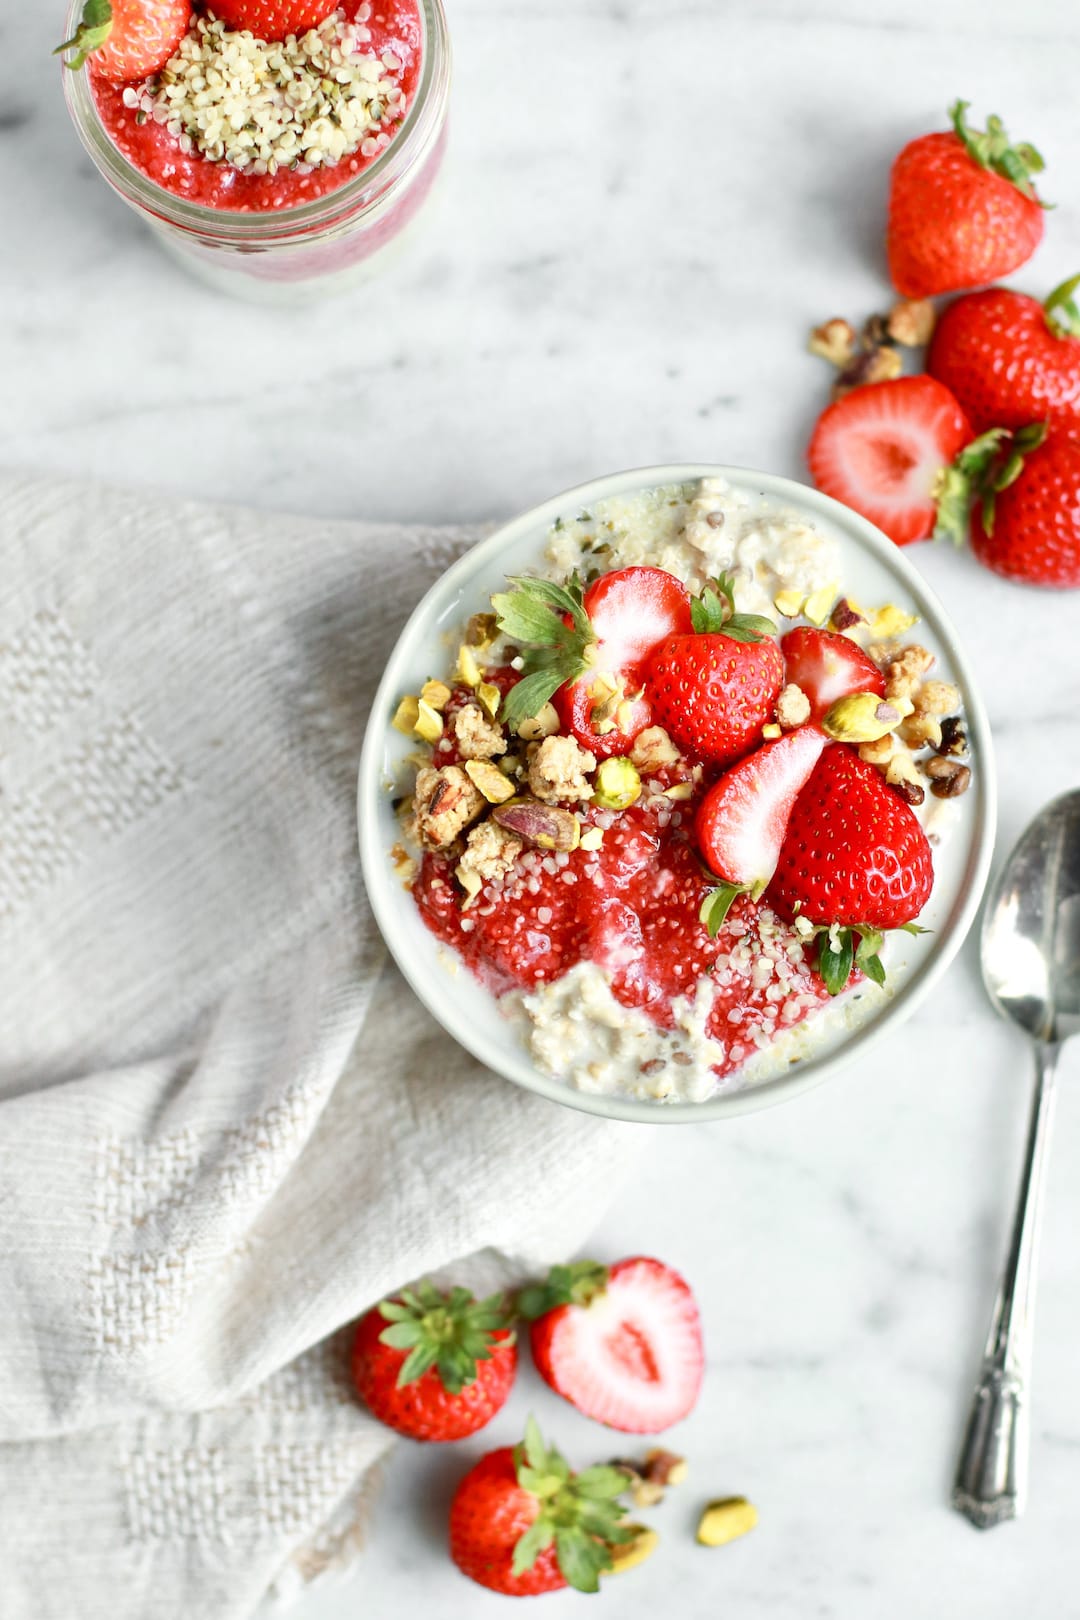 Easy and Healthy Strawberry Overnight Oats